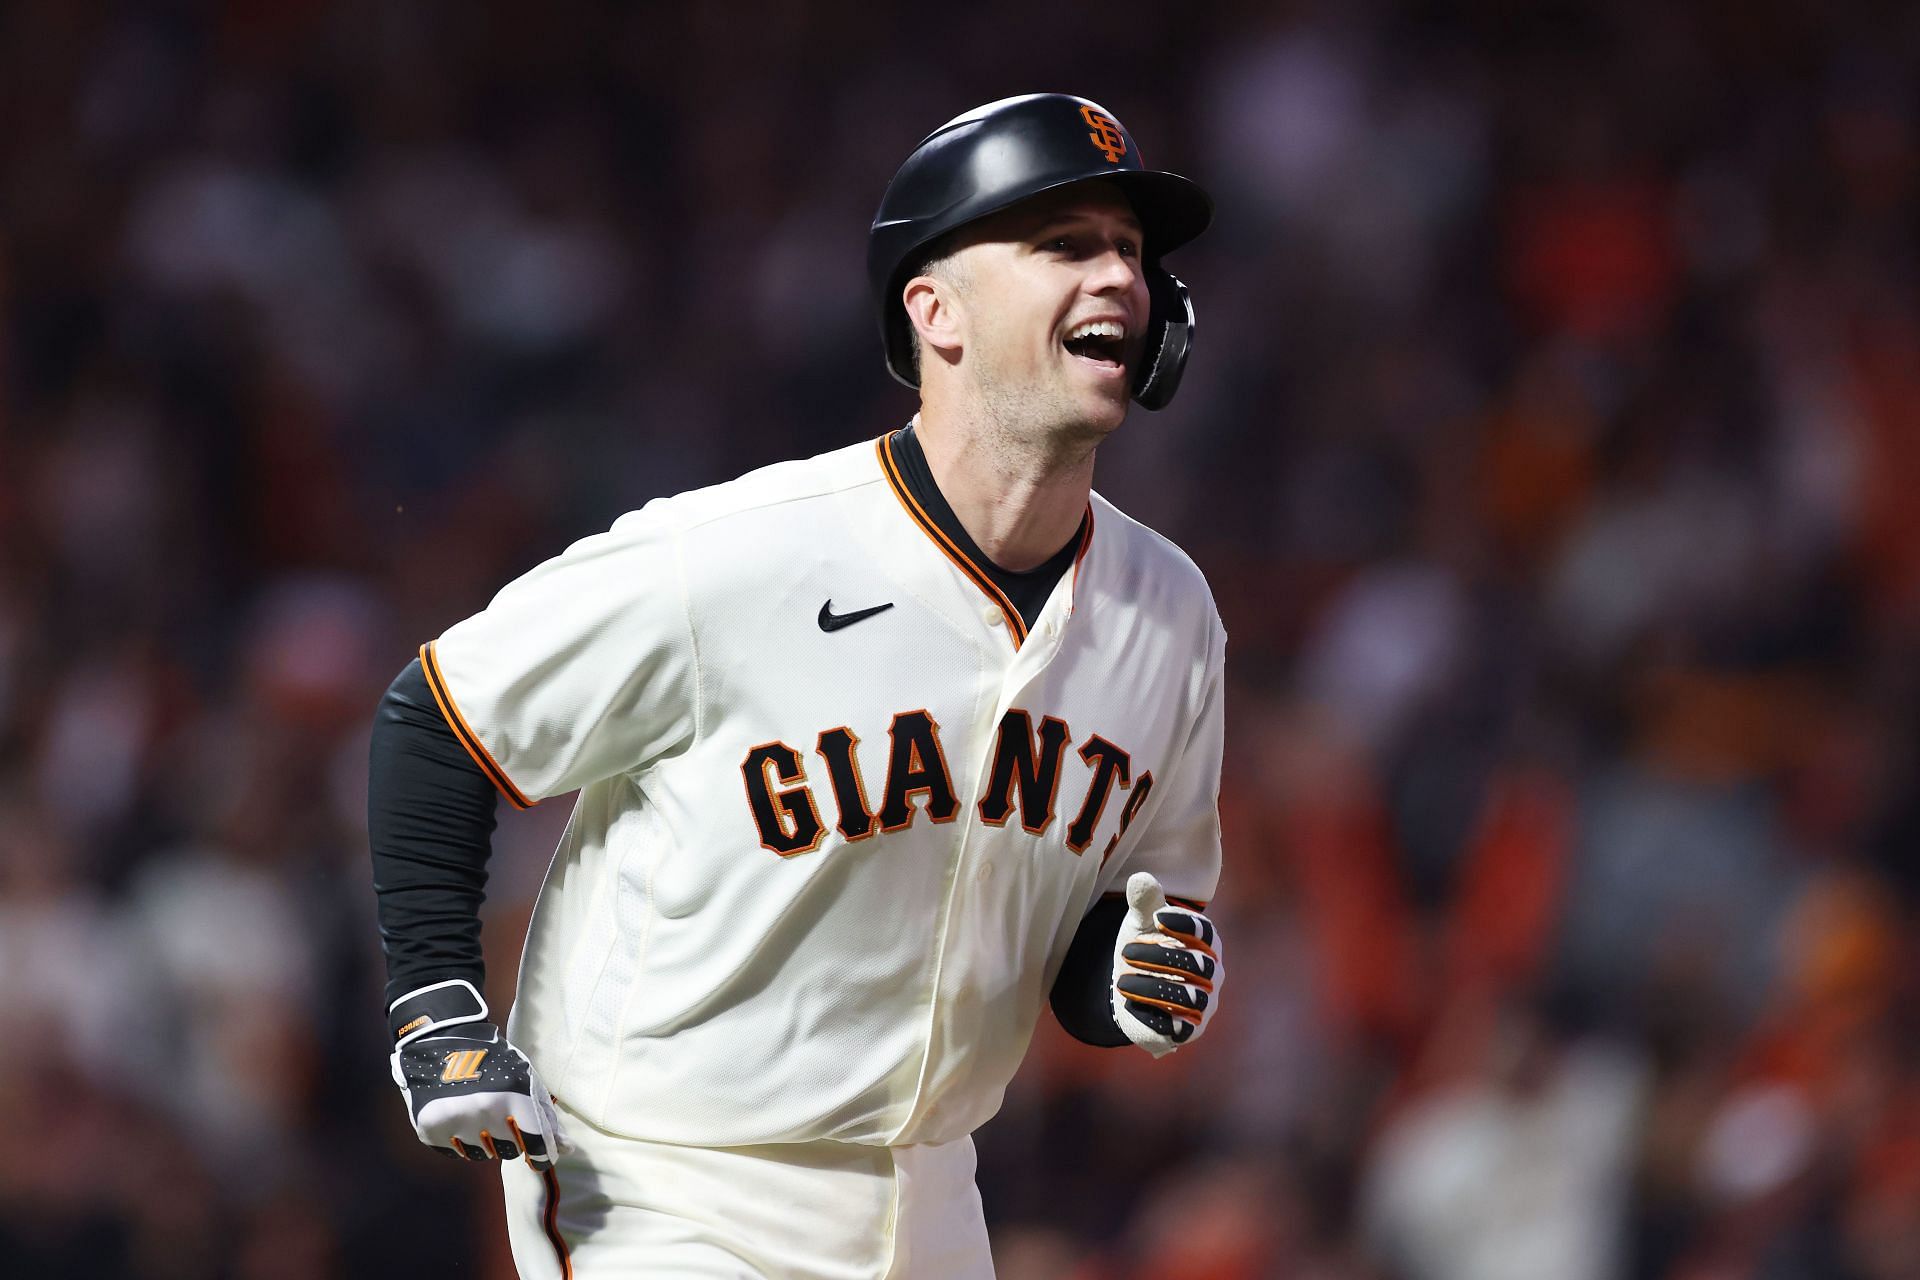 Which Giants players have won the Gold Glove? MLB Immaculate Grid